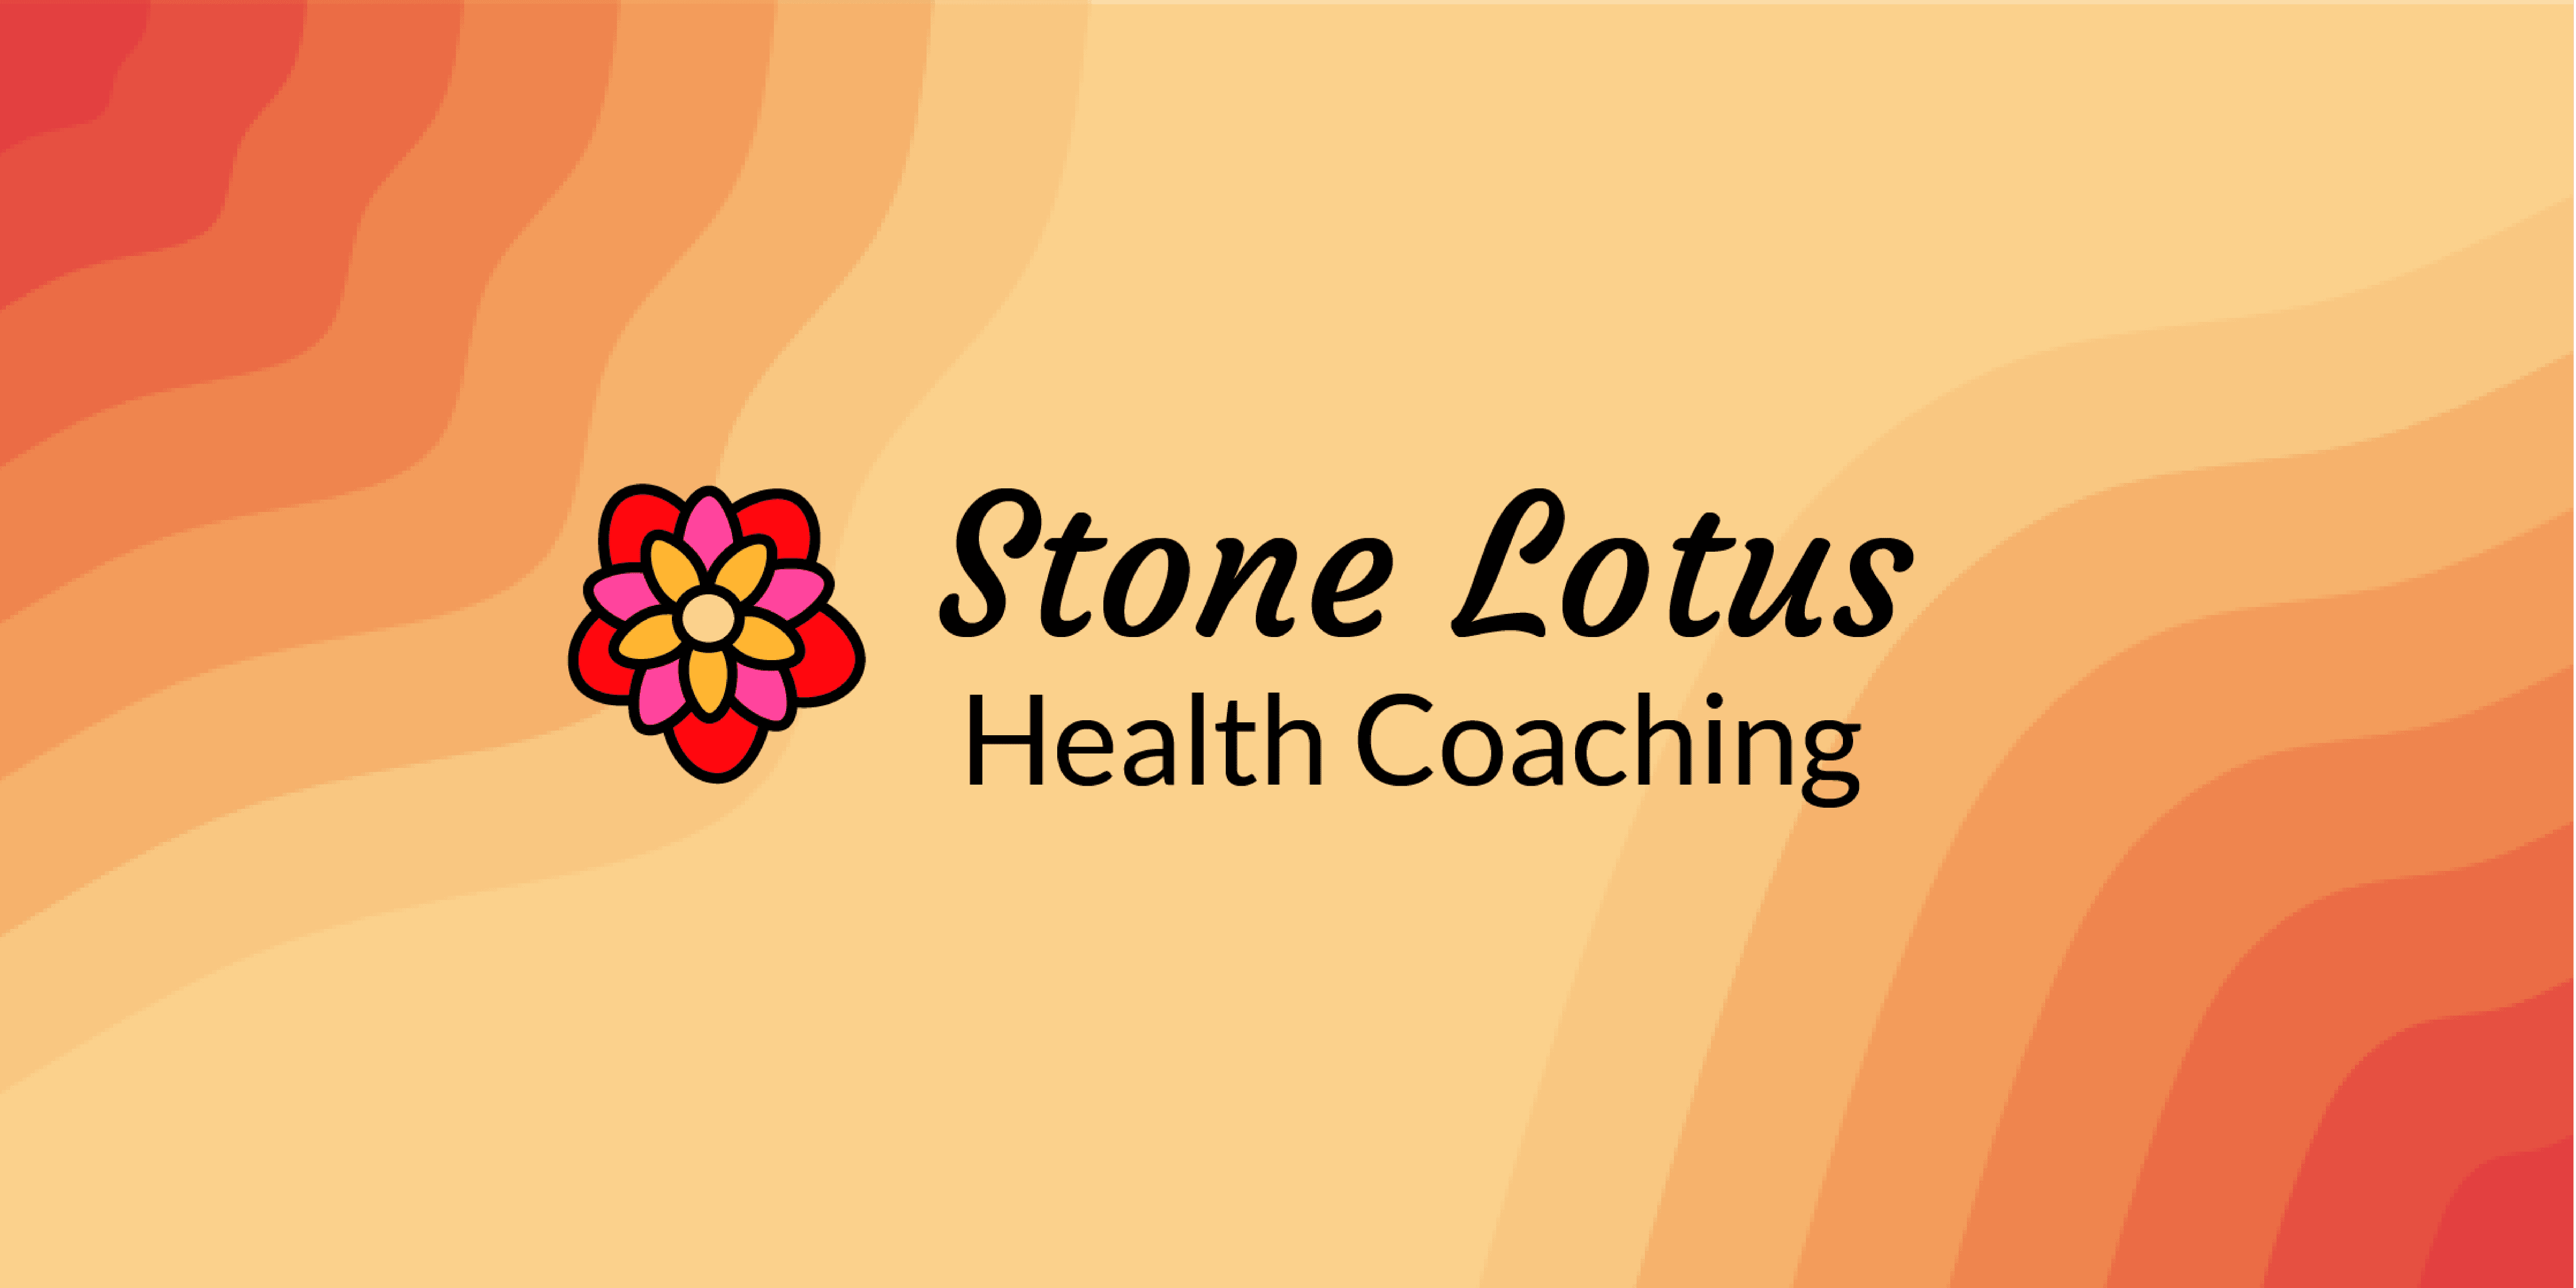 Bright Brand Identity and Website for Health Coach Service